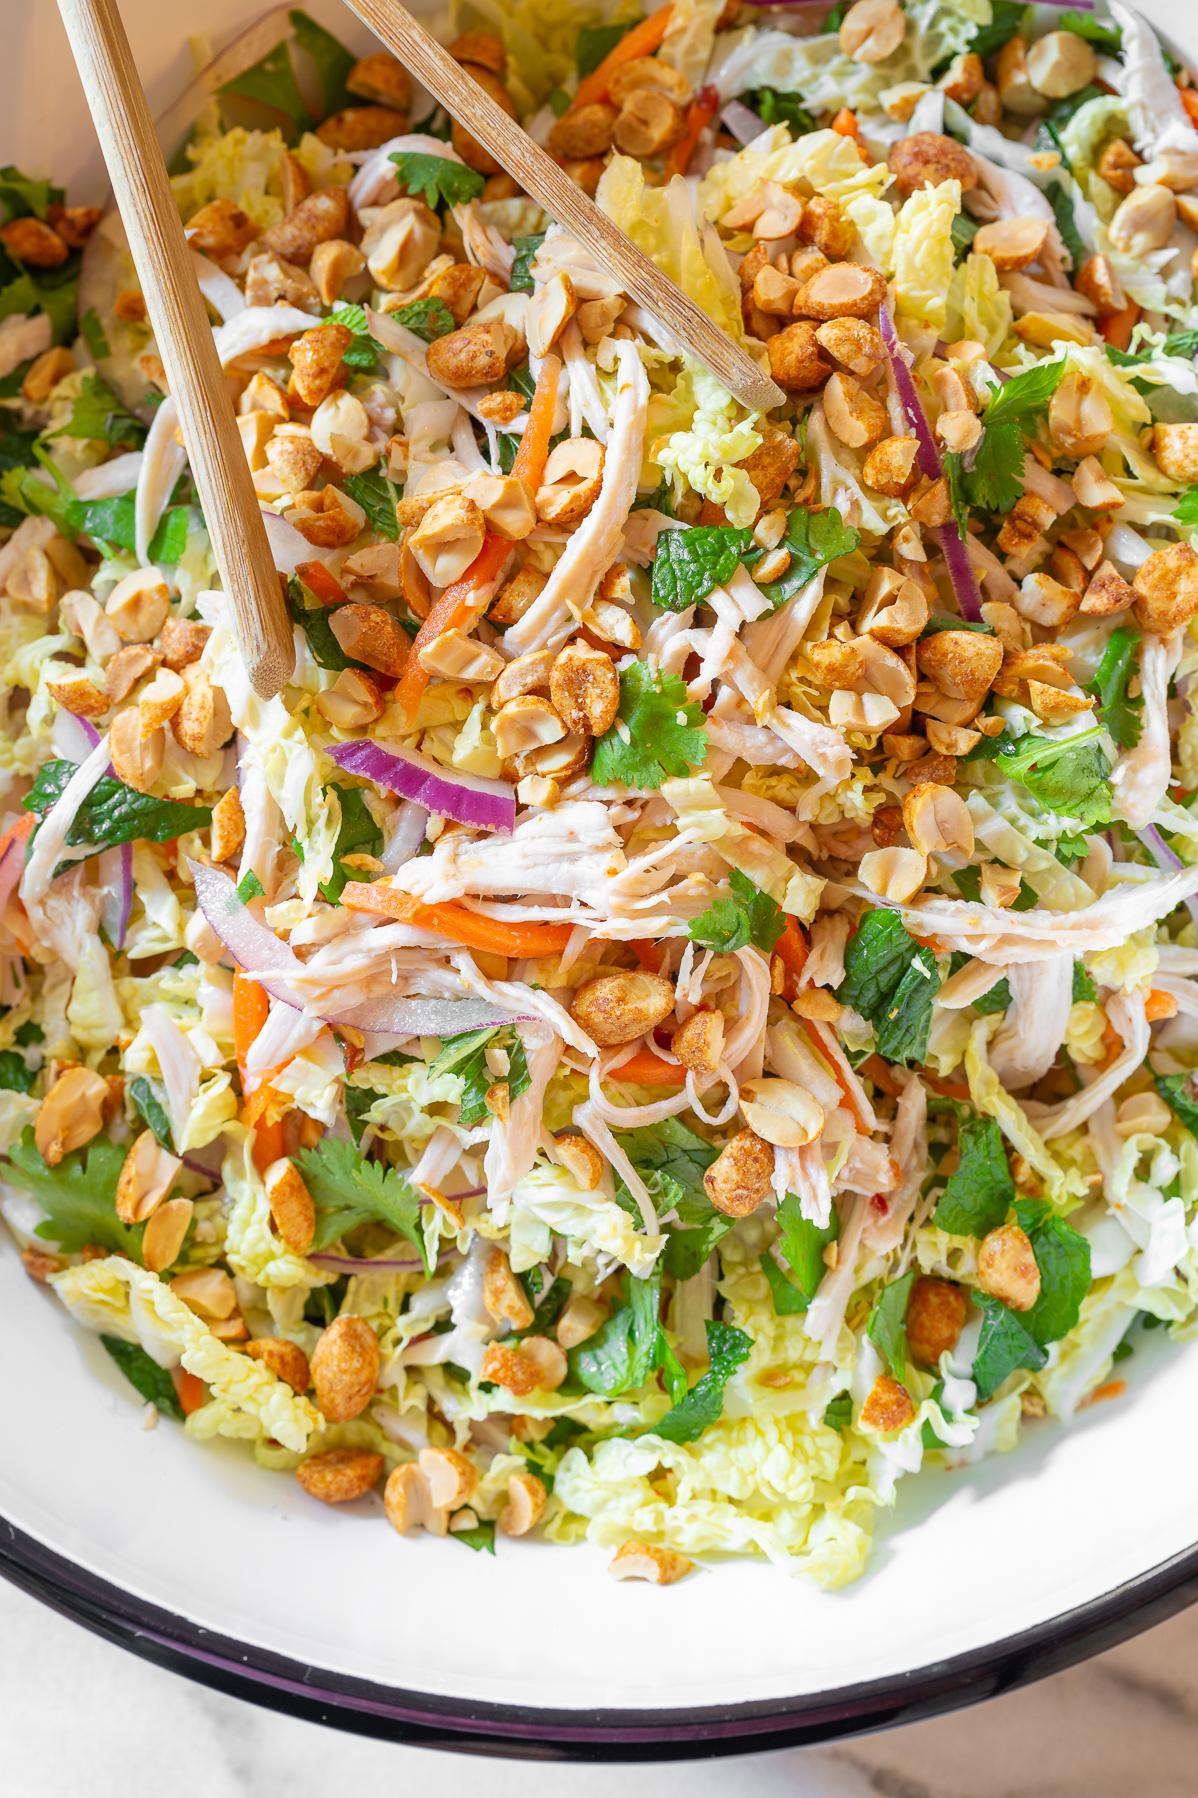  Tender chicken and crunchy veggies make this salad a mouthwatering delight.